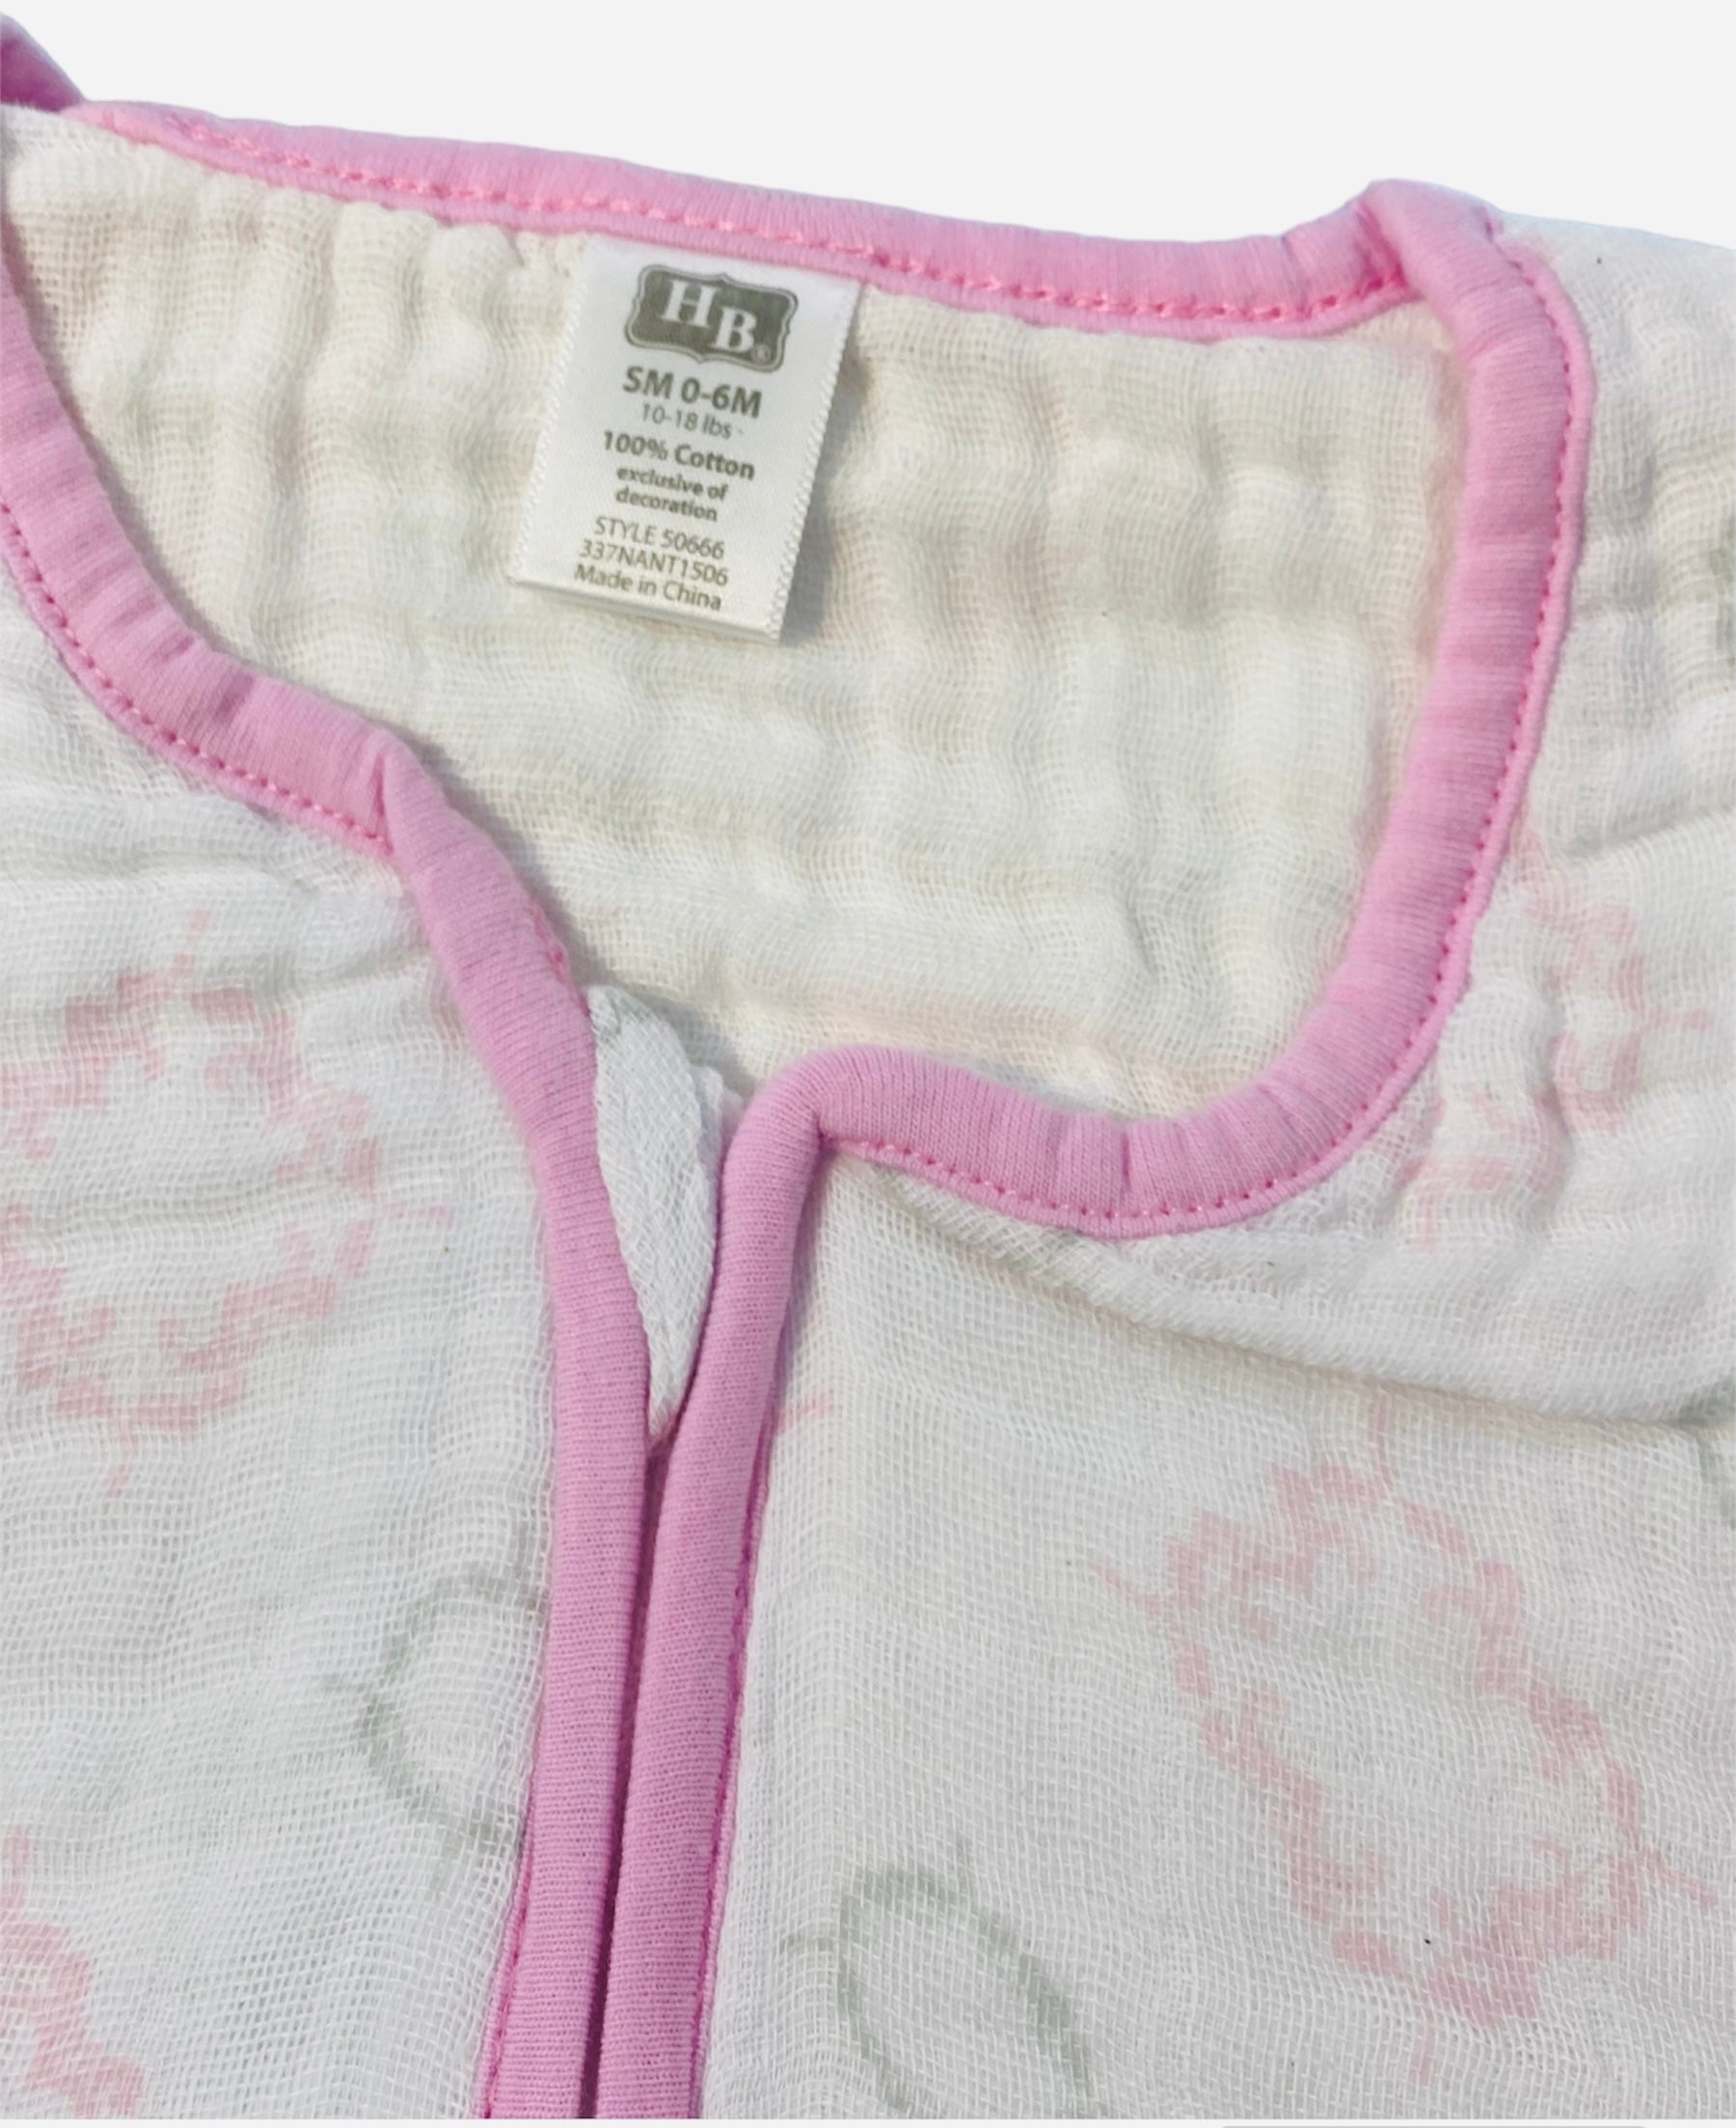 Hudson Baby Swaddle Sheet with Zipper